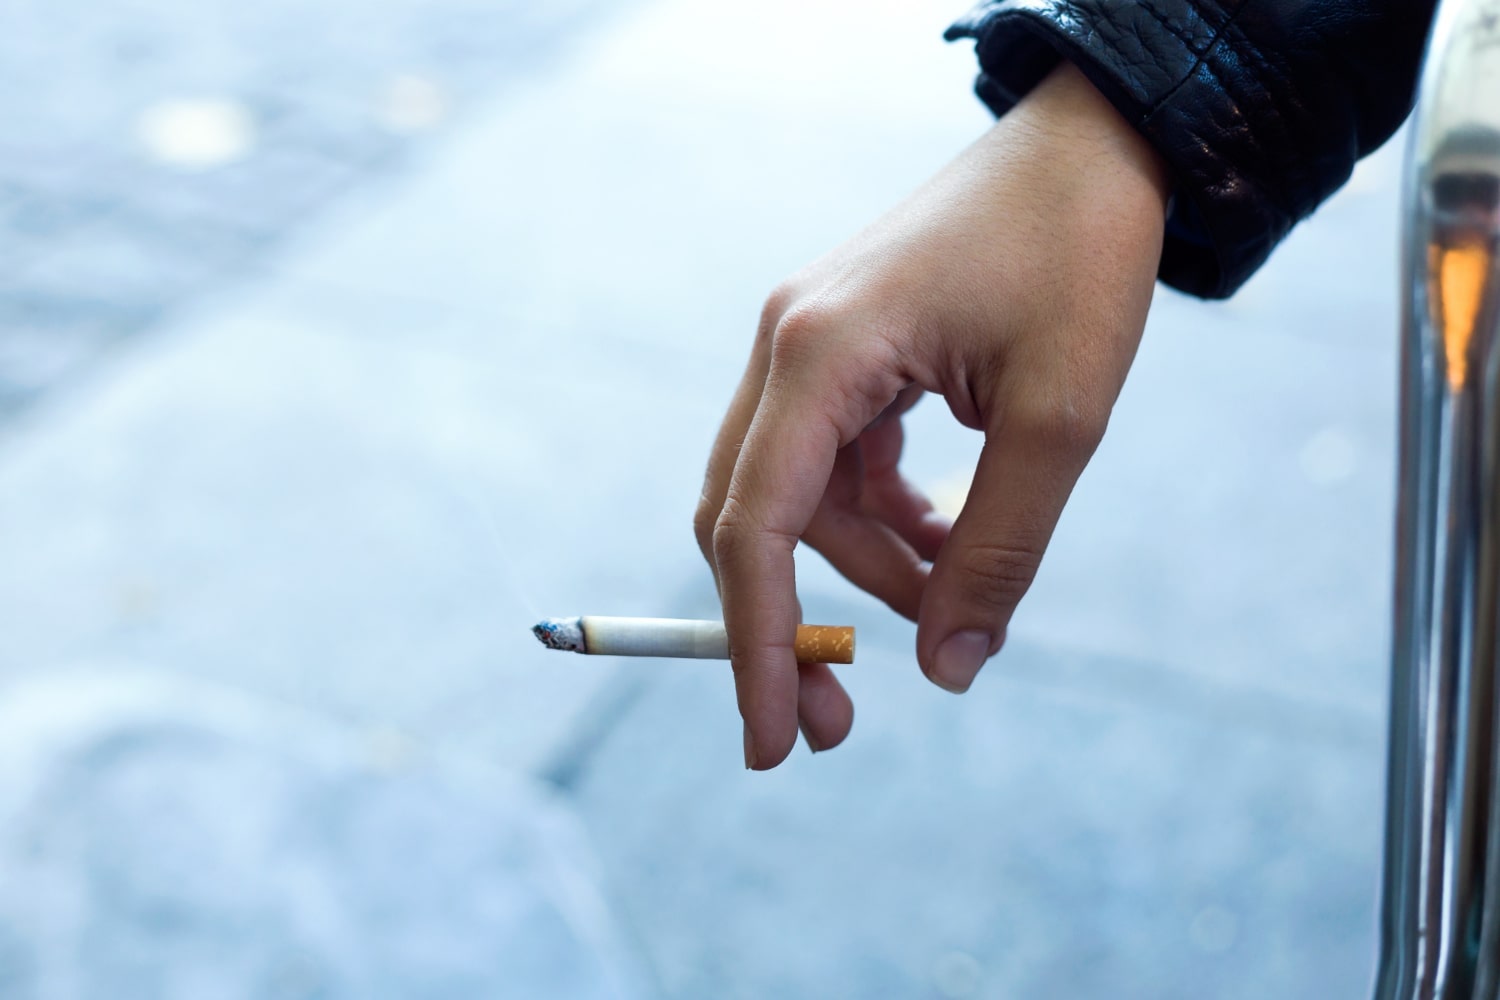 smoking is the main cause of chronic obstructive pulmonary disease, says WHO